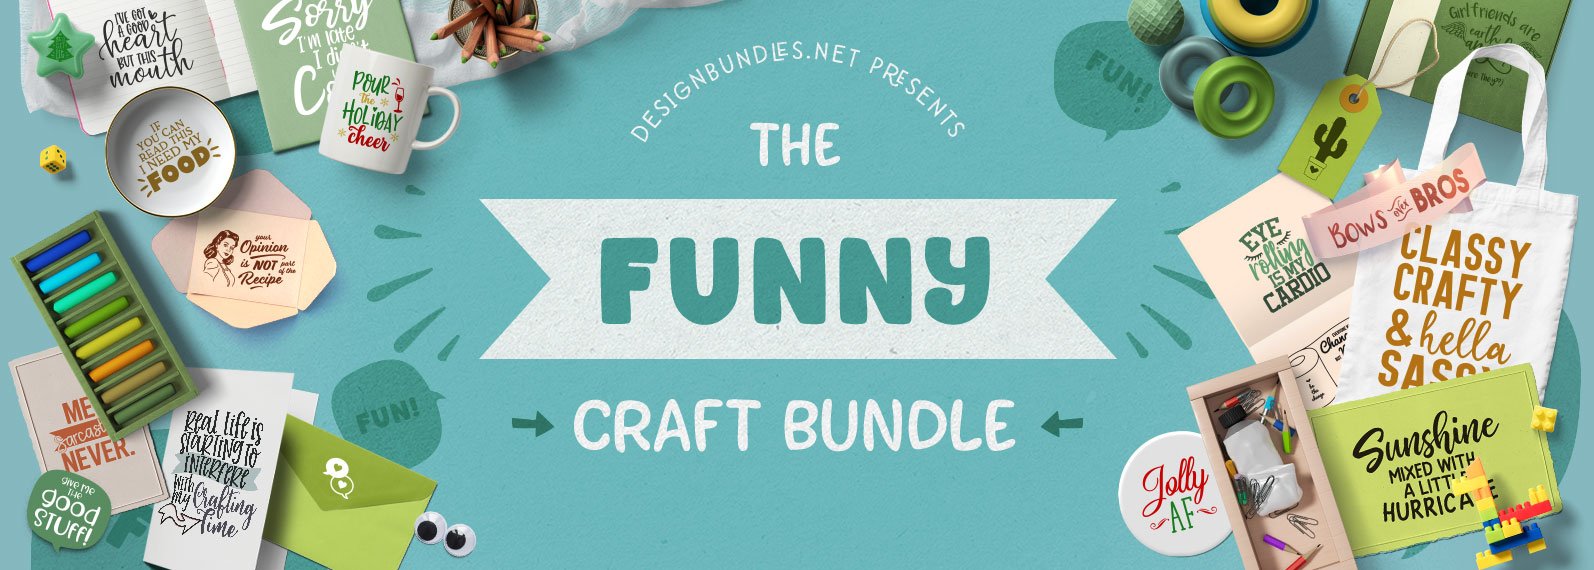 The Funny Craft Bundle